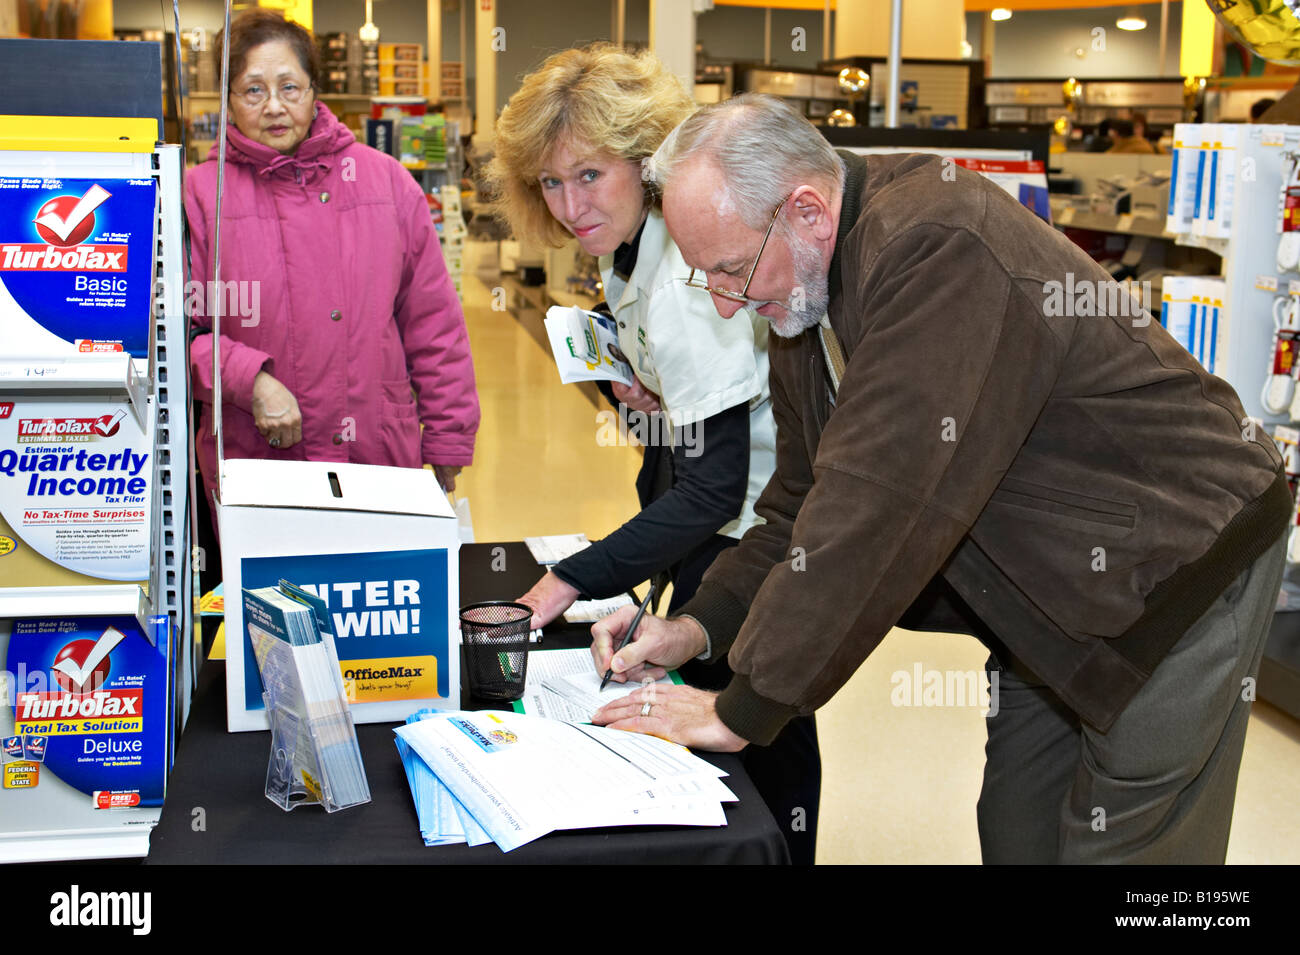 EVENTS Algonquin Illinois Man and woman fill out sweepstakes entry form at OfficeMax retail store grand opening Stock Photo